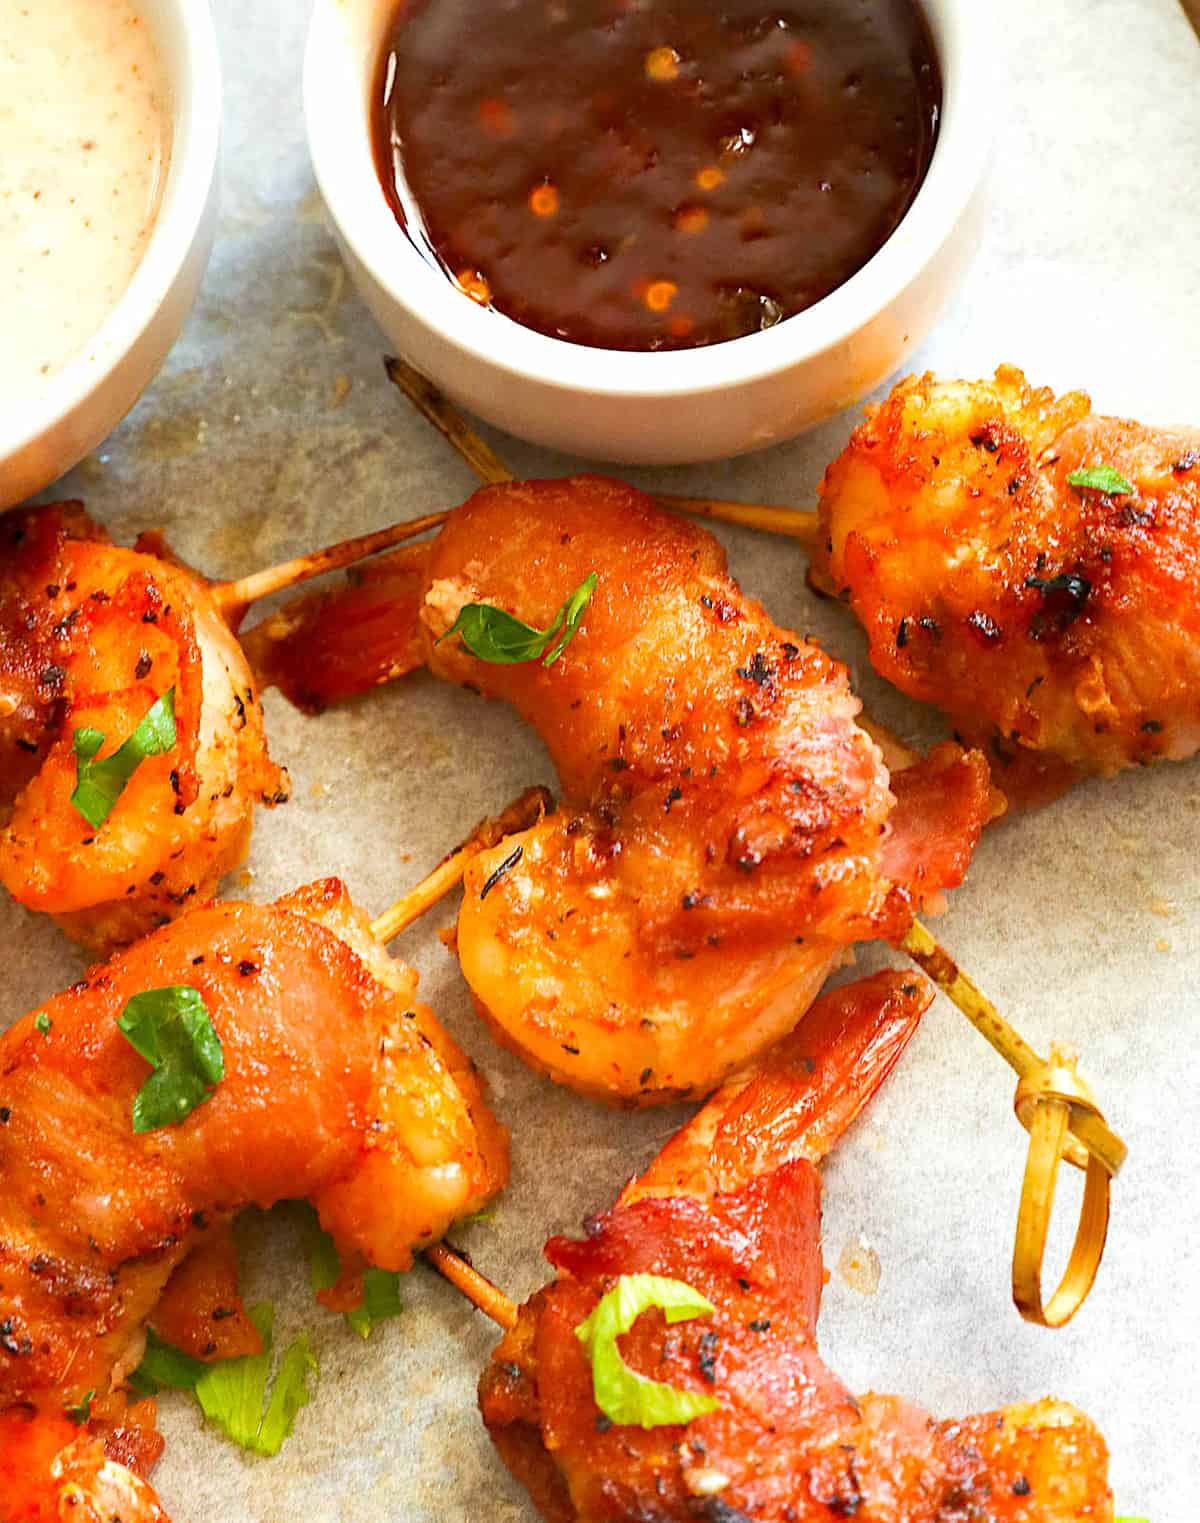 Serving hot sauce and remoulade with crispy, tender bacon-wrapped shrimp appetizers